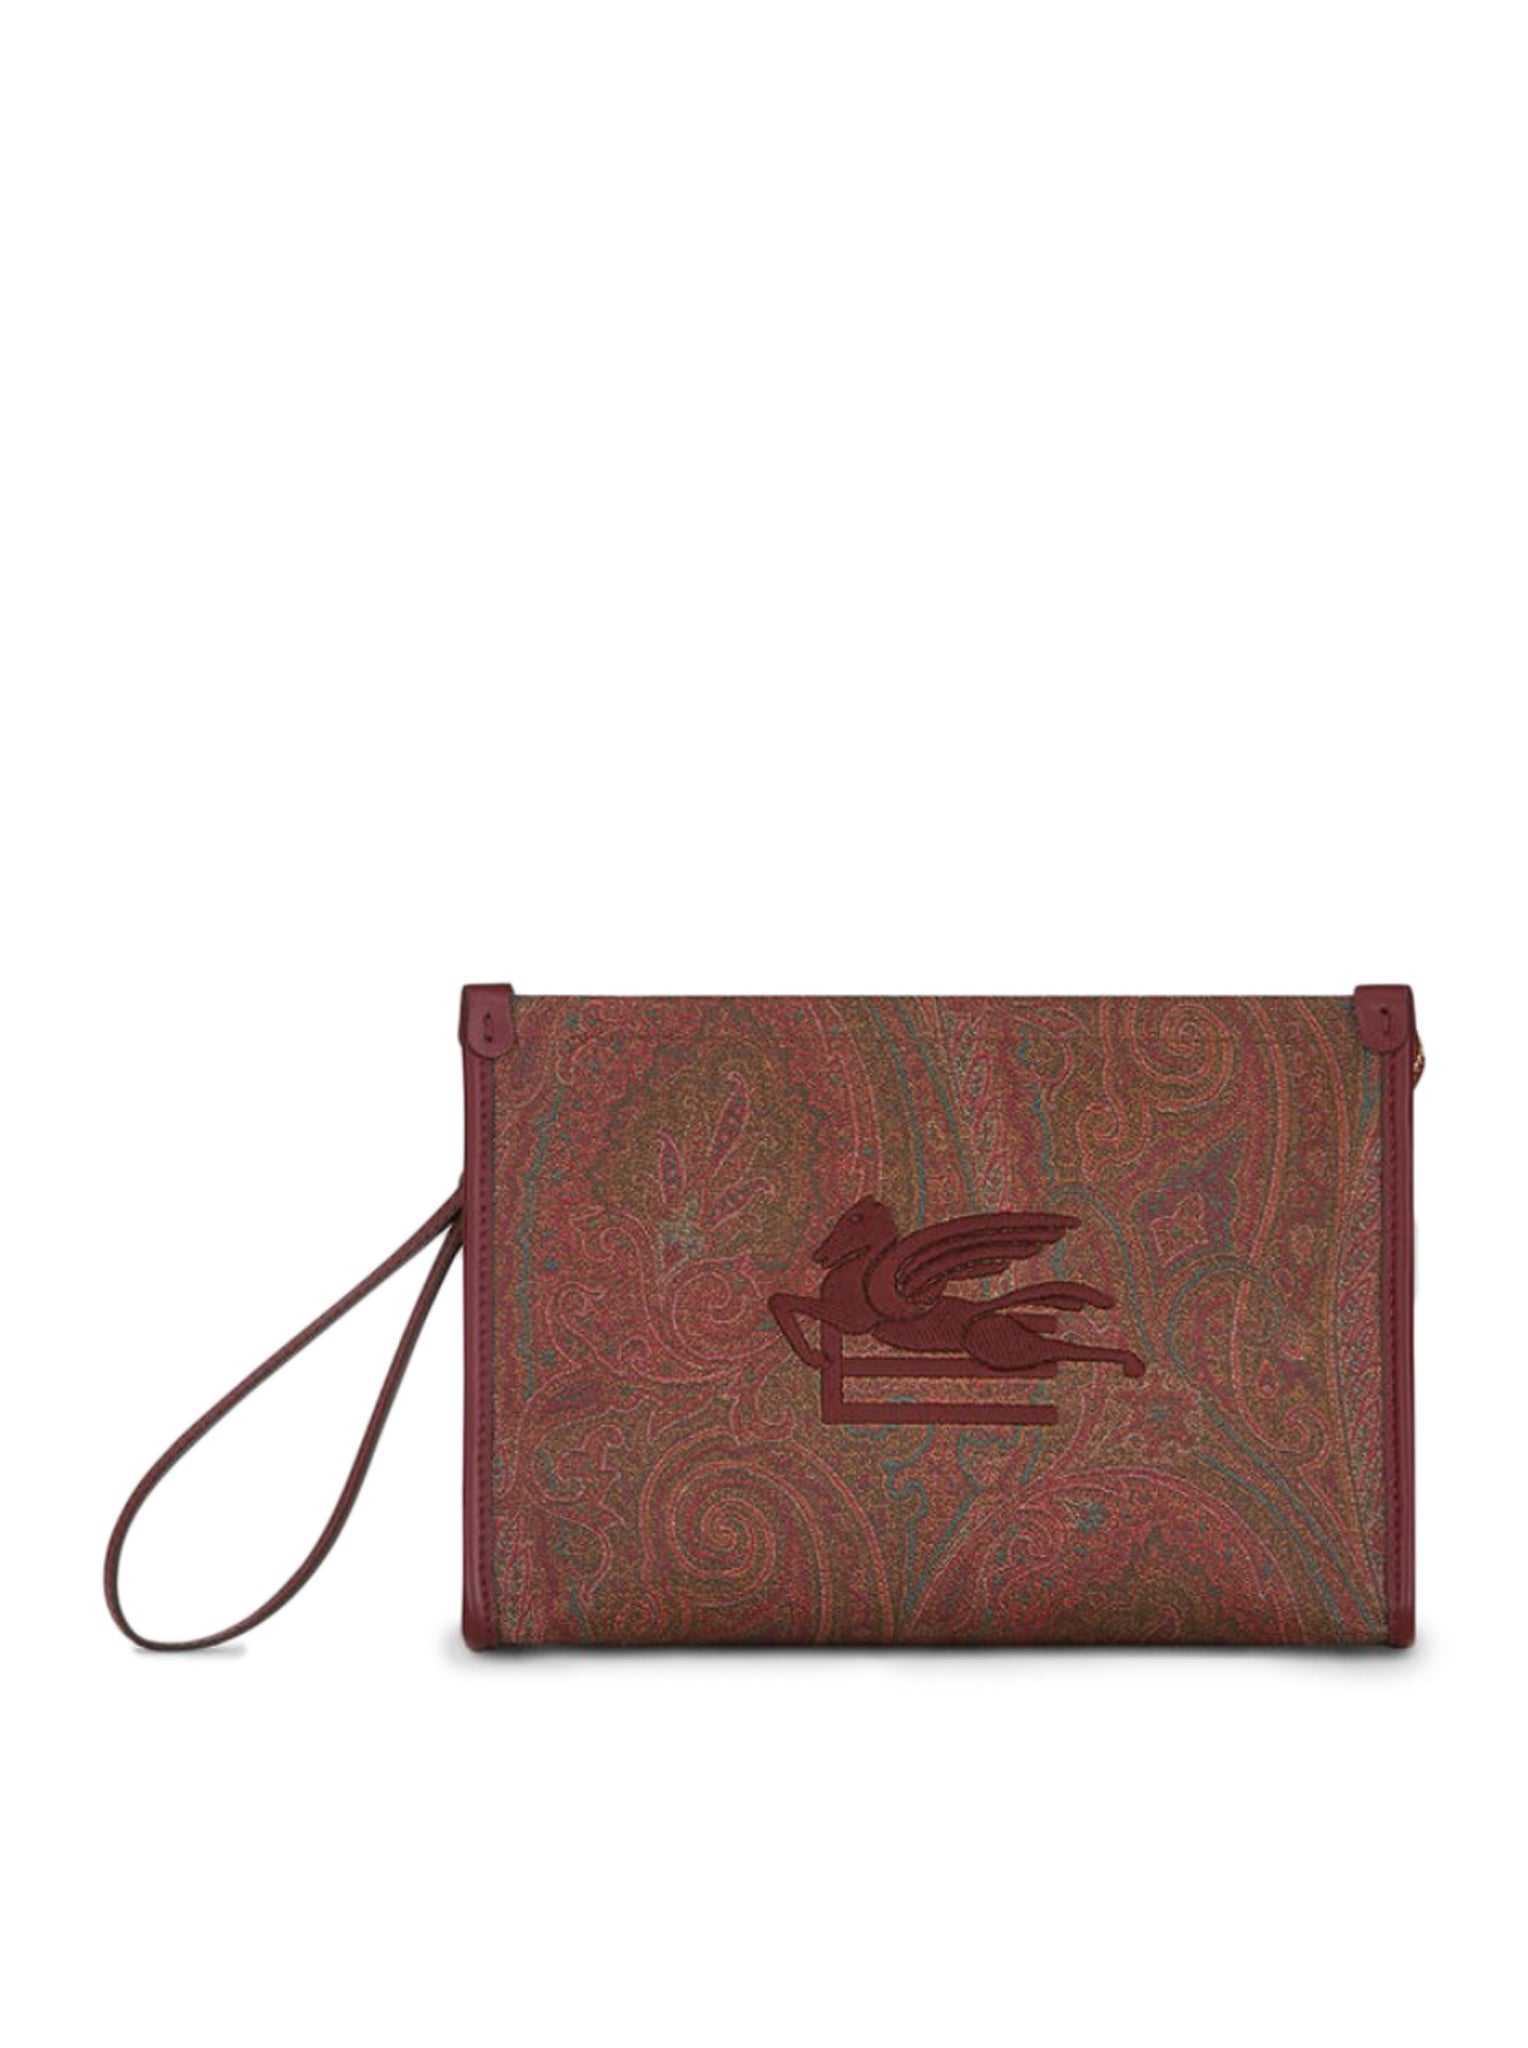 POUCH GRANDE LOVE TROTTER PAISLEY